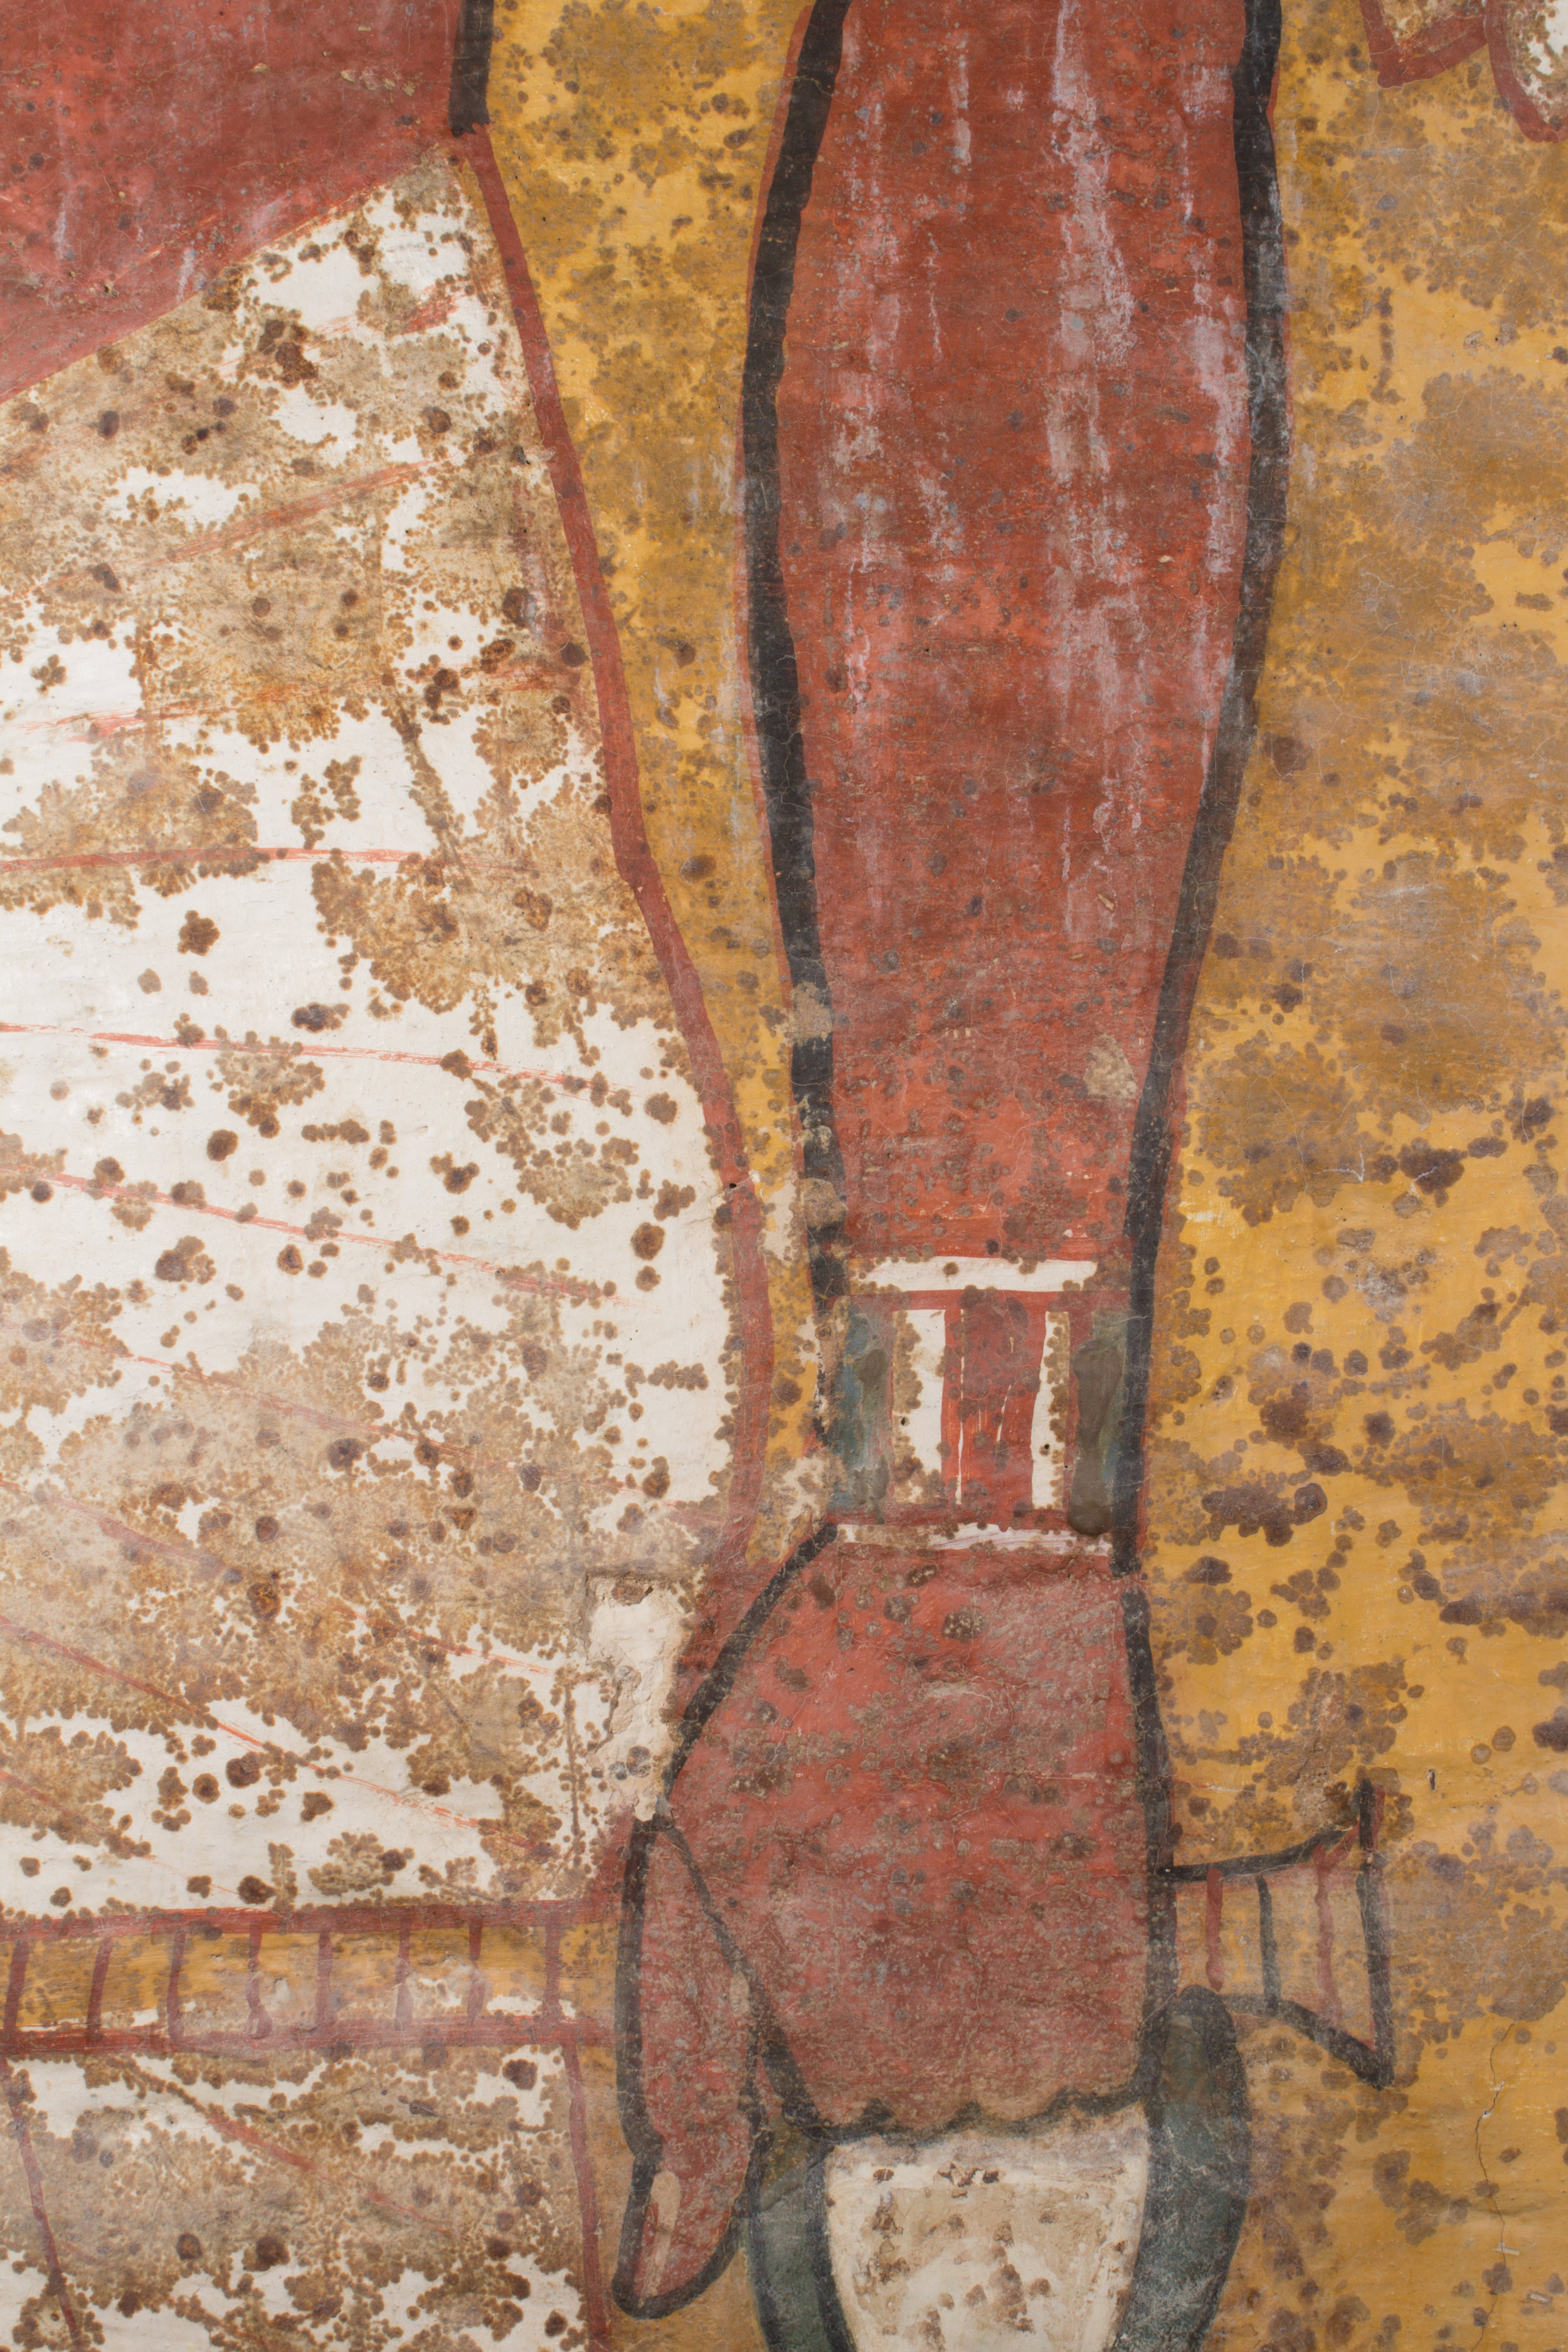  Multiple layers of non-original coatings and drips from previous interventions covered the surface of the wall paintings prior to treatment. The coatings were extremely glossy in some areas while some drips had blanched.&nbsp;  Image © J. Paul Getty